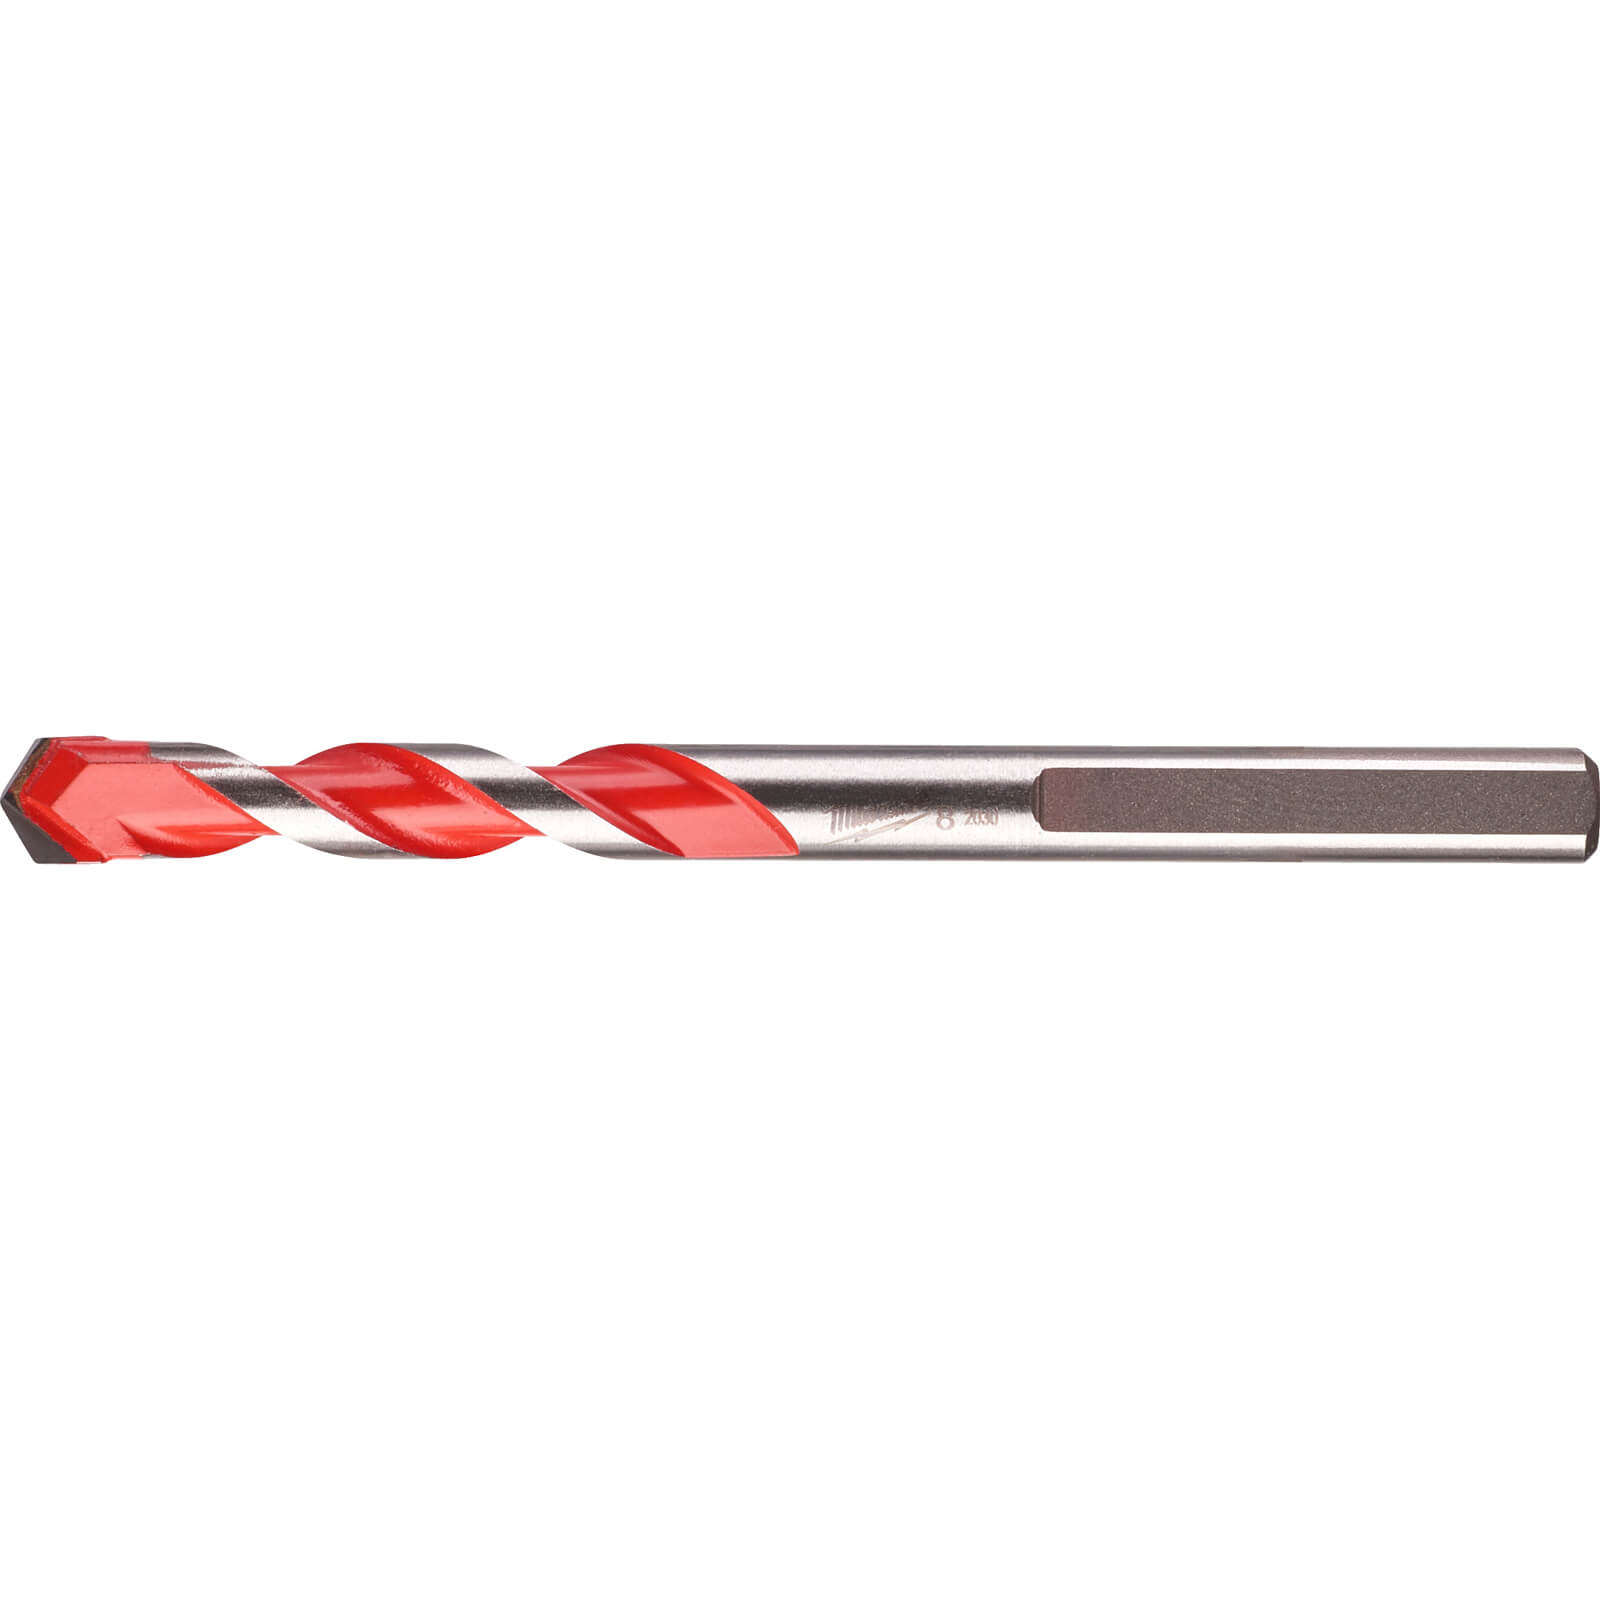 Image of Milwaukee Premium Concrete Drill 8mm 100mm Pack of 1